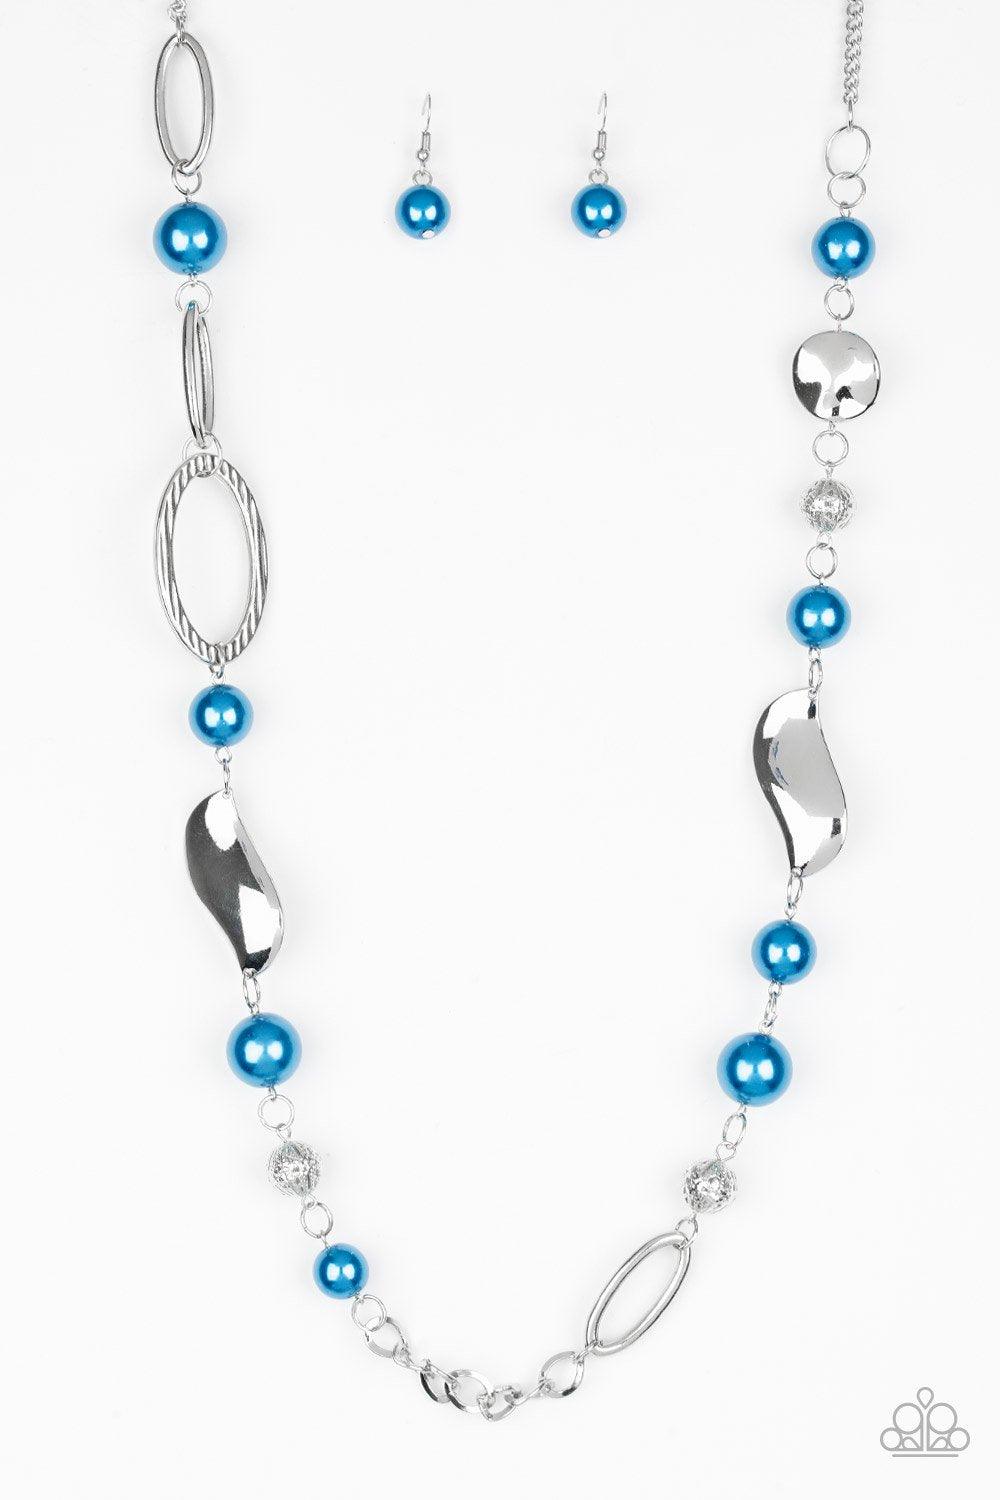 Paparazzi Accessories All About Me - Blue Oversized blue pearls, ornate silver beads, and an array of glistening silver accents trickle along a lengthened silver chain for a refined look. Features an adjustable clasp closure. Jewelry